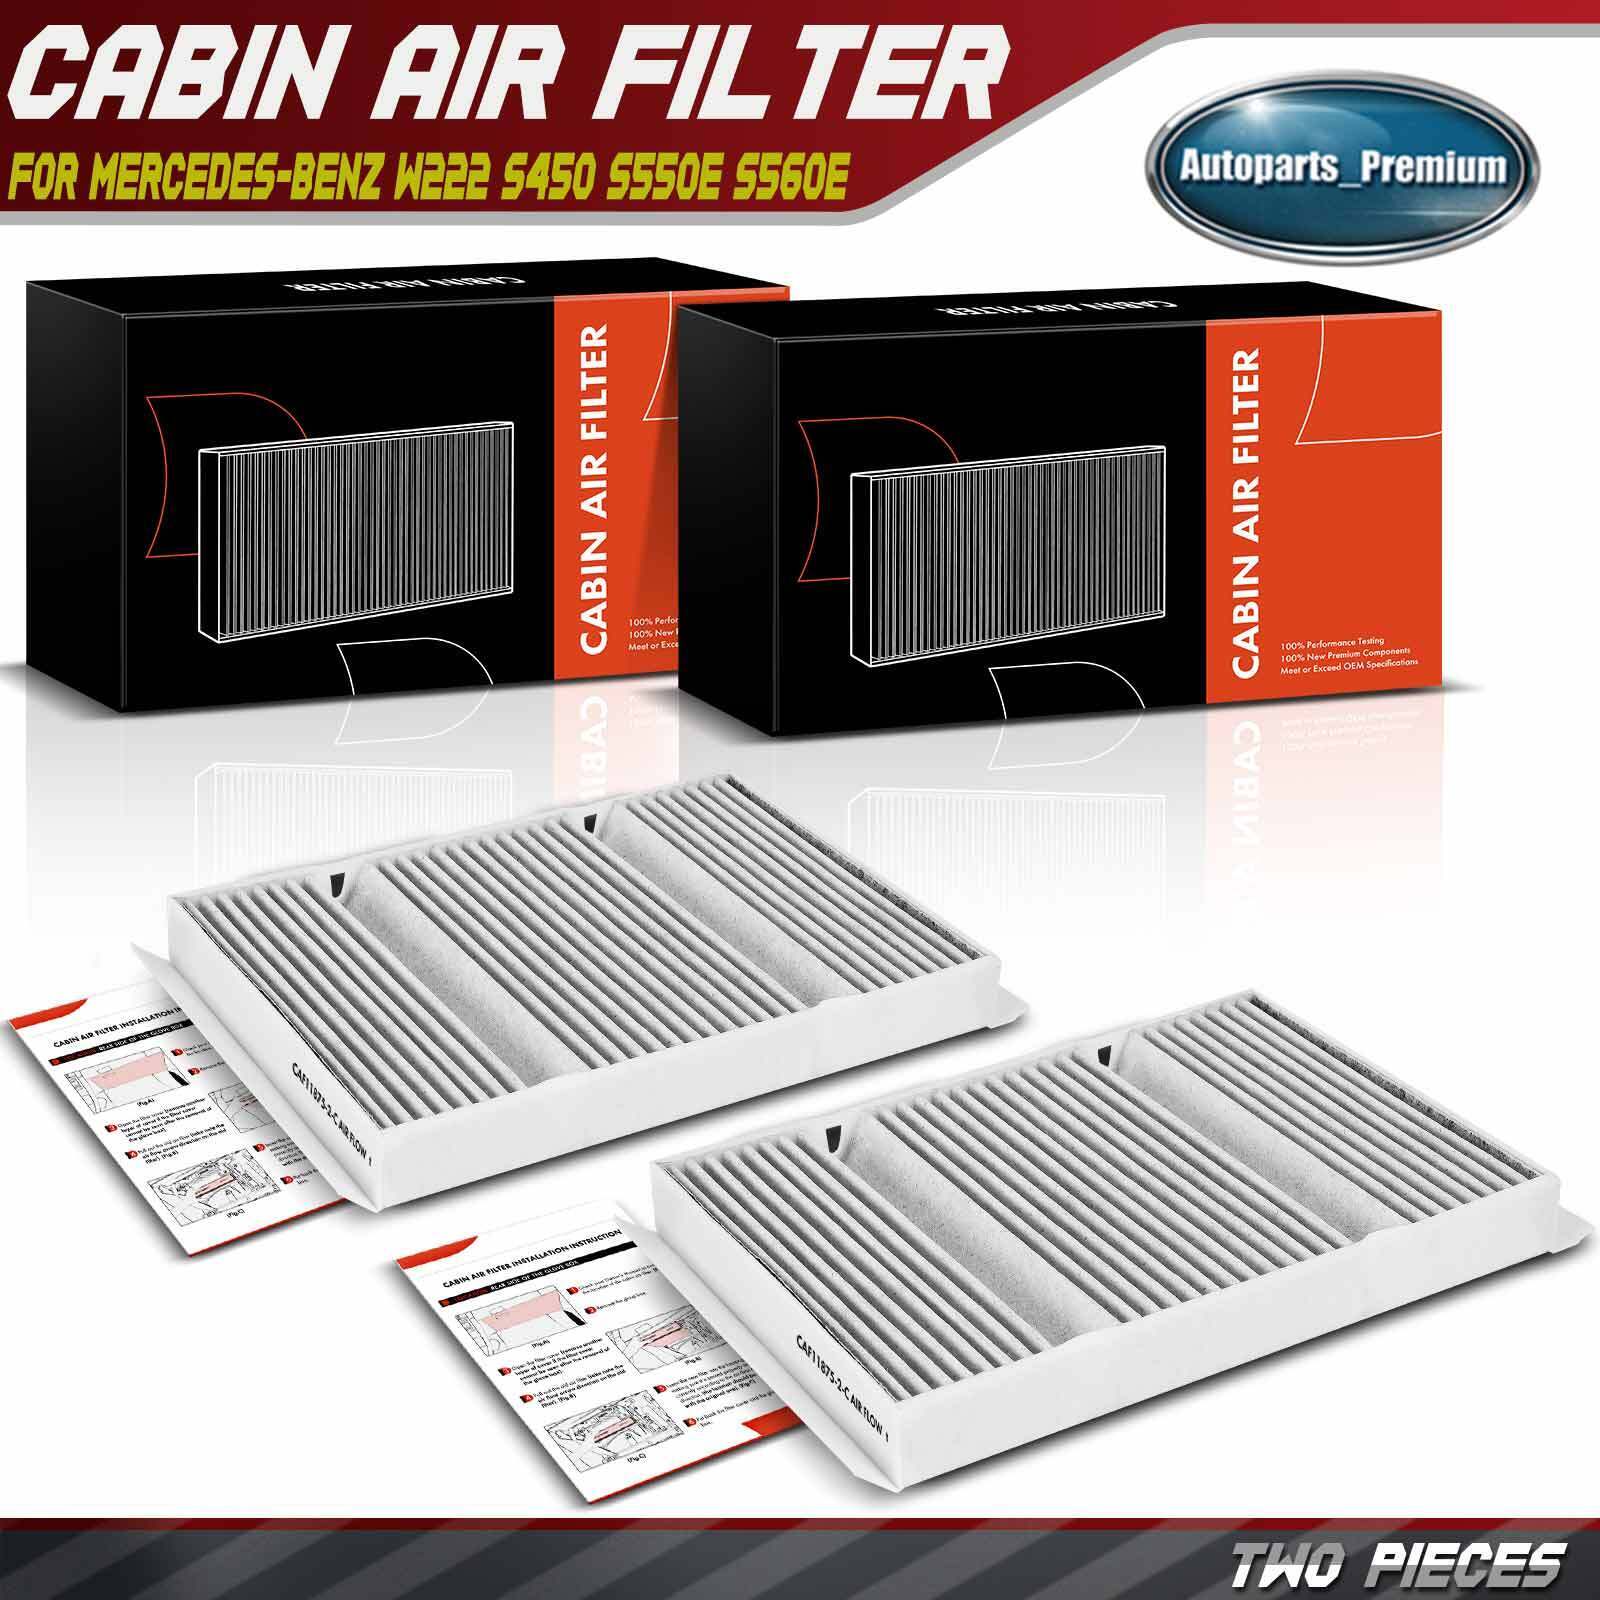 2x Cabin Air Filter for Mercedes-Benz W222 S450 S550e S560e S600 C217 S63 AMG